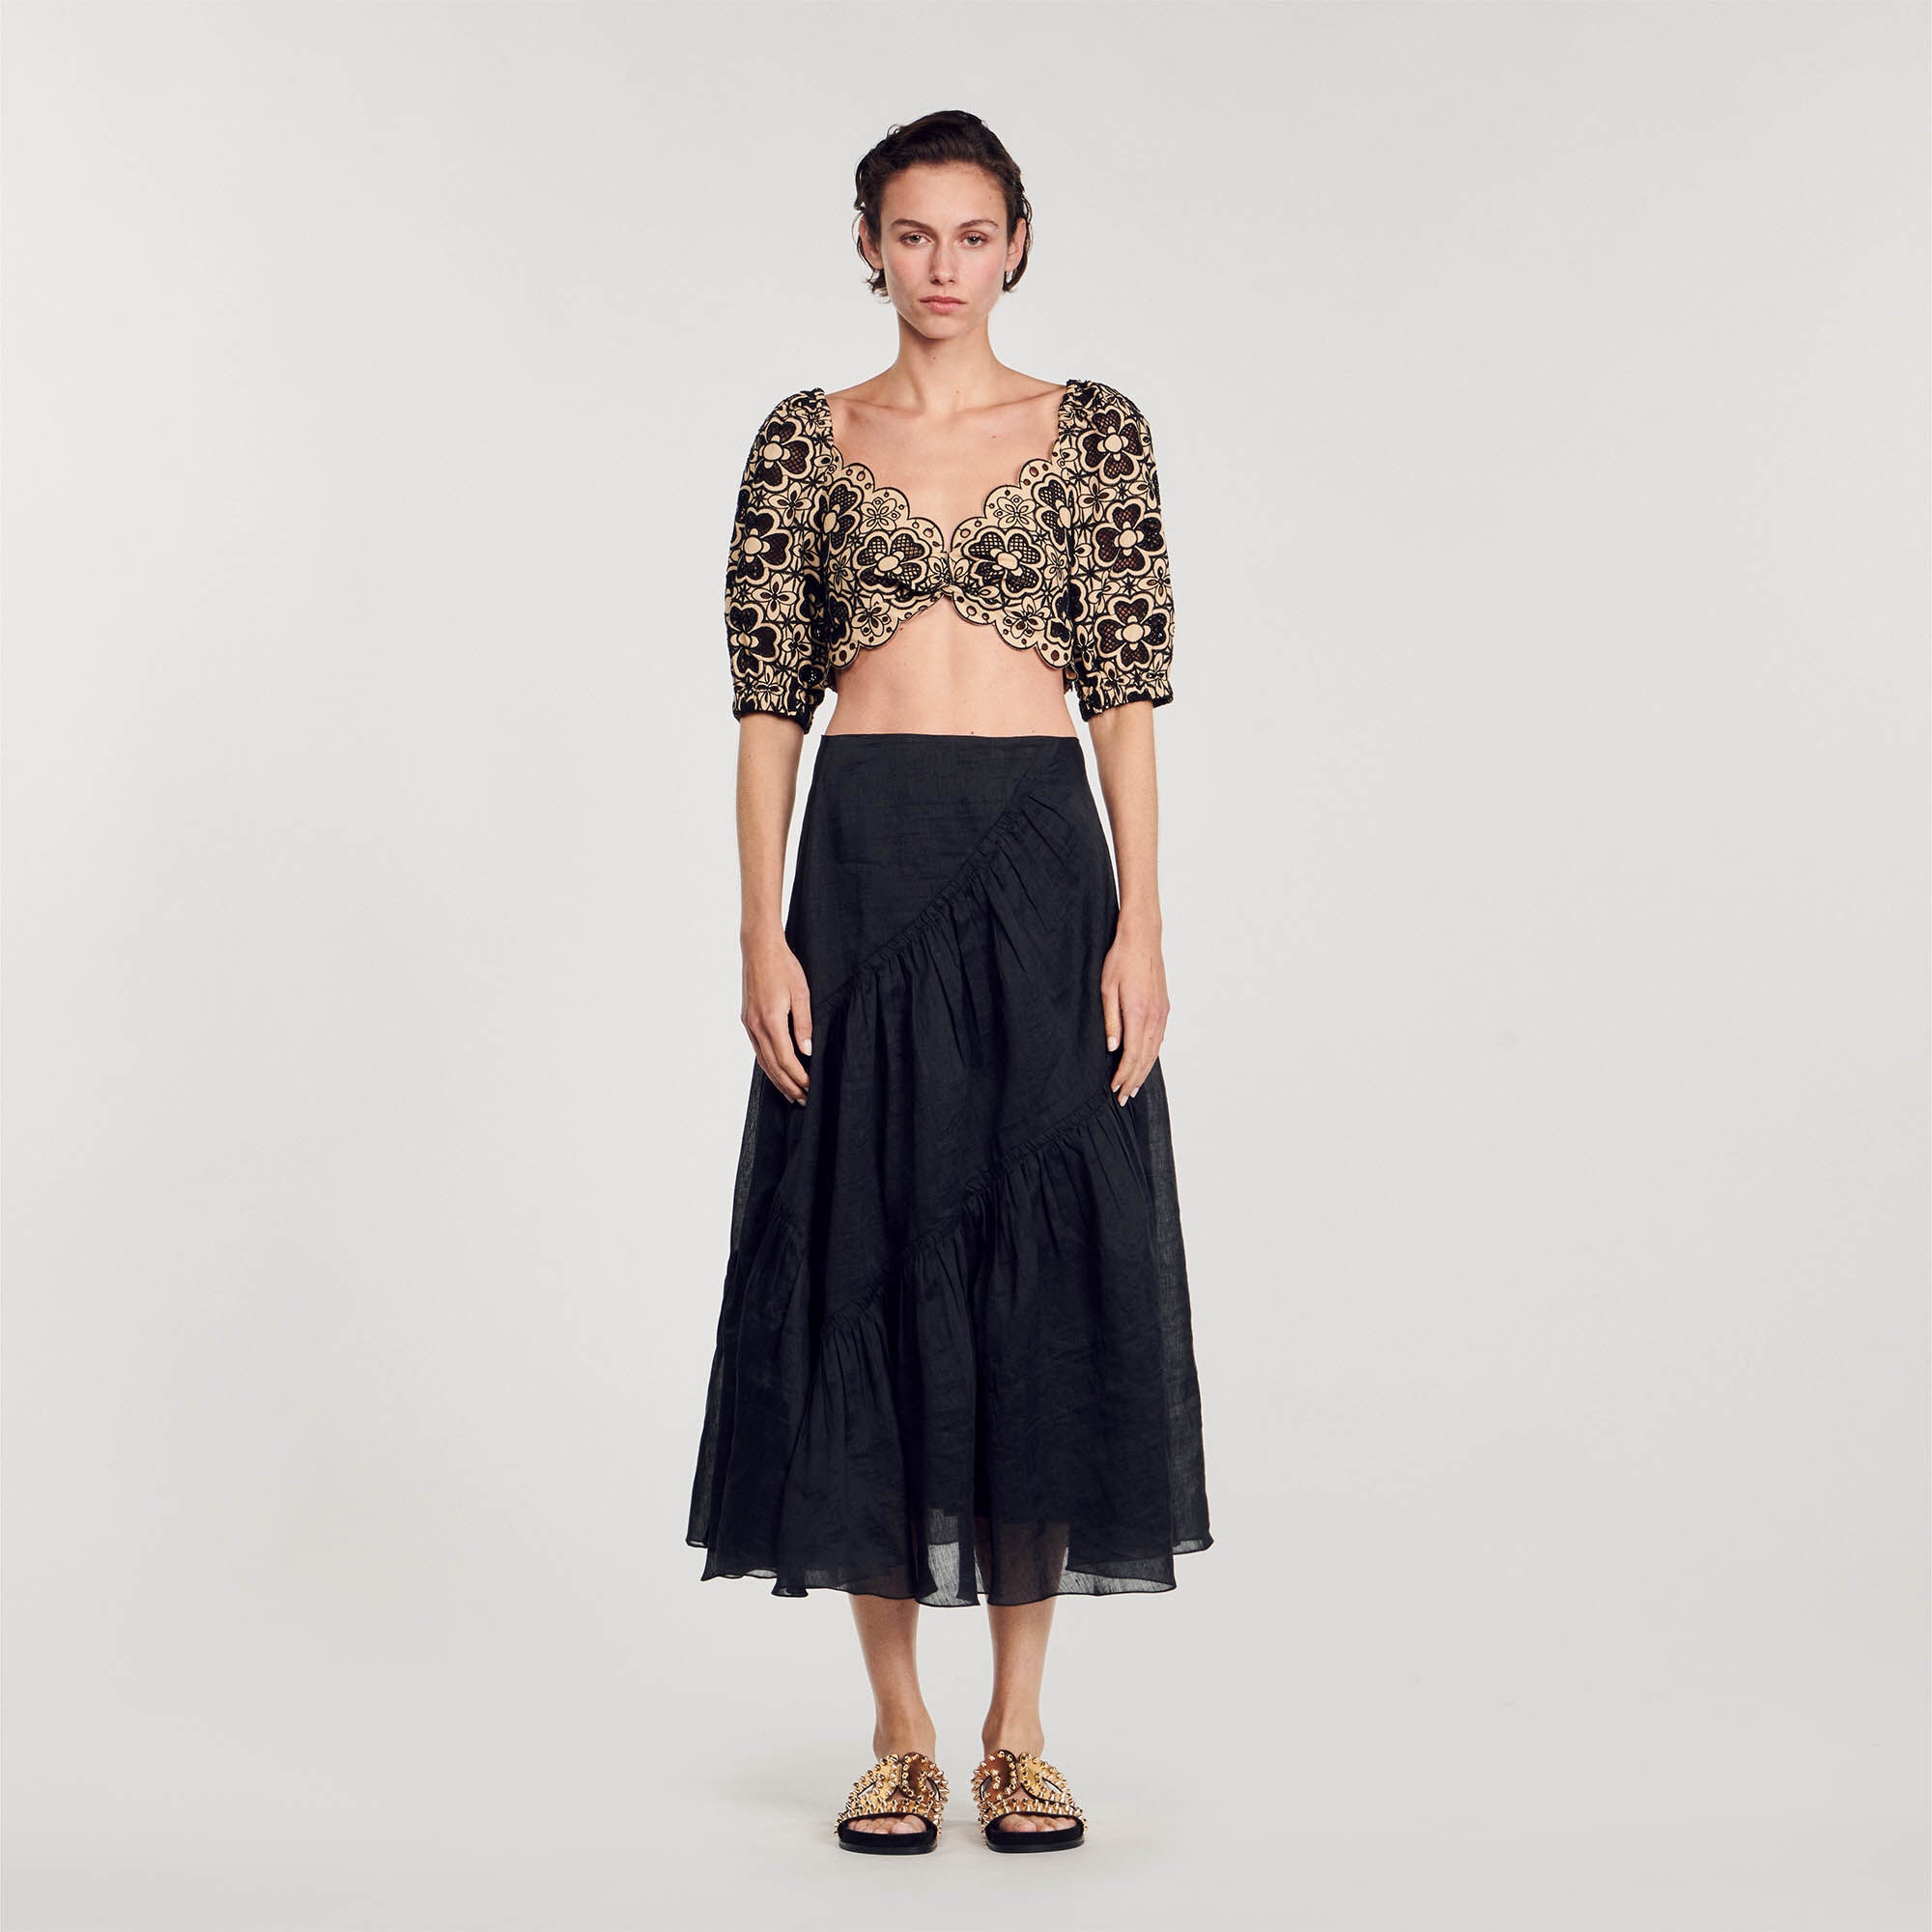 BRODERIE ANGLAISE CROP TOP - 3